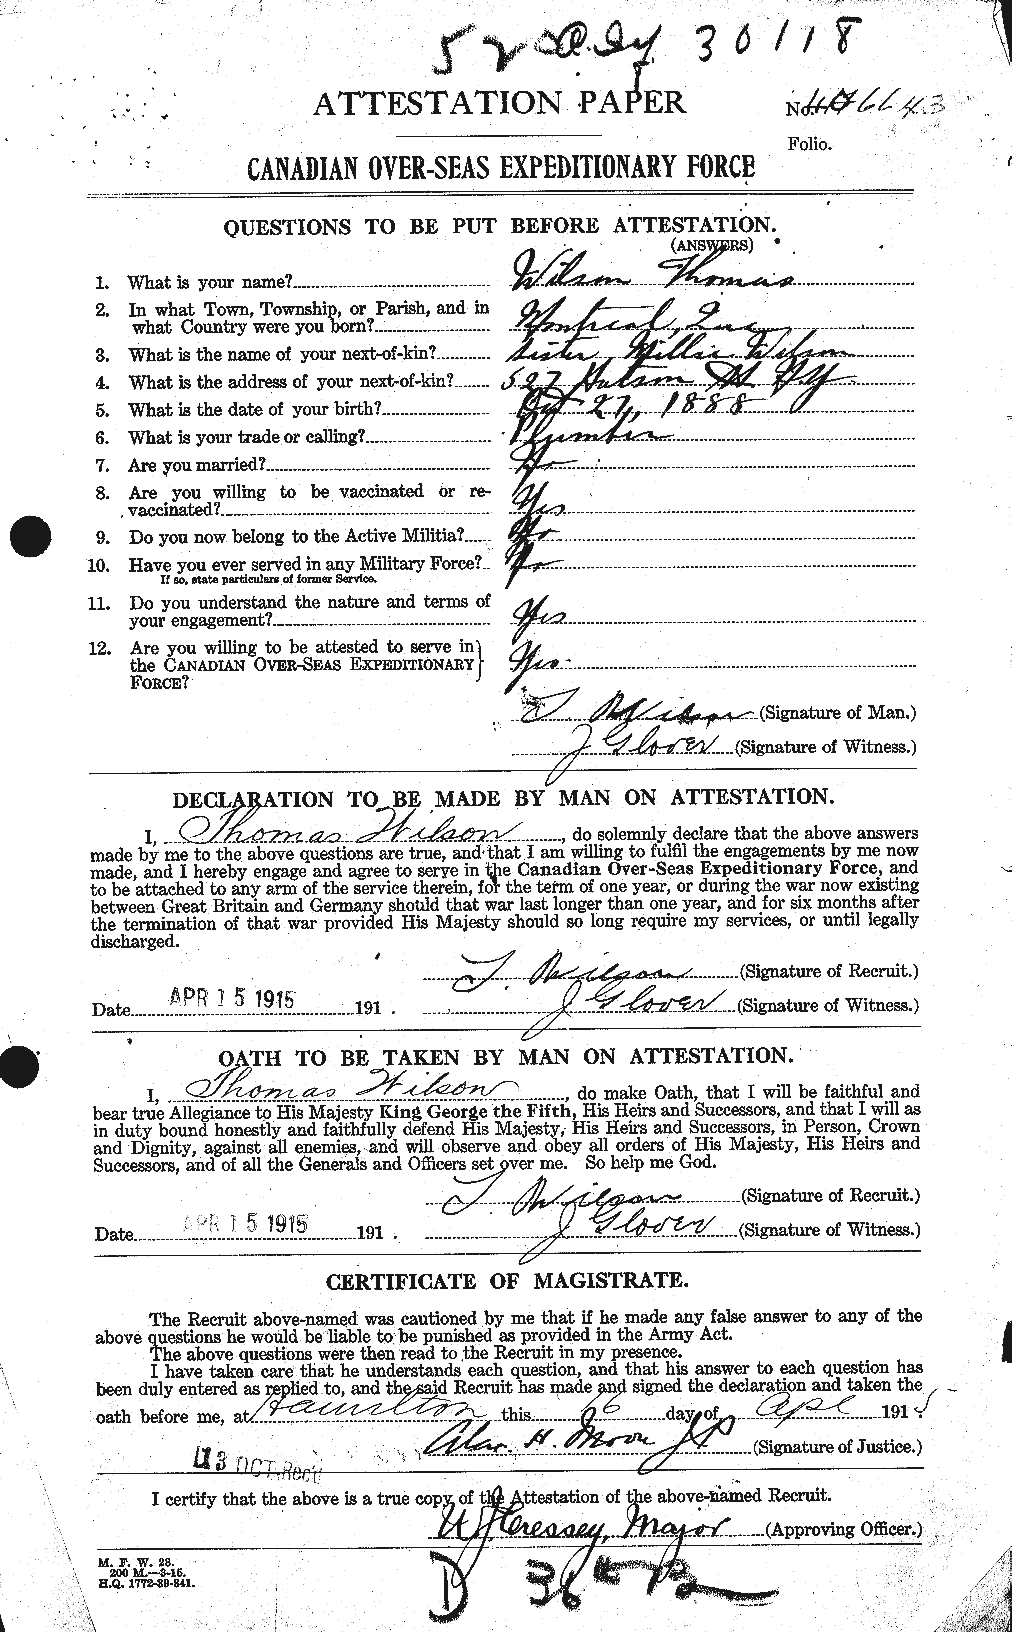 Personnel Records of the First World War - CEF 681185a